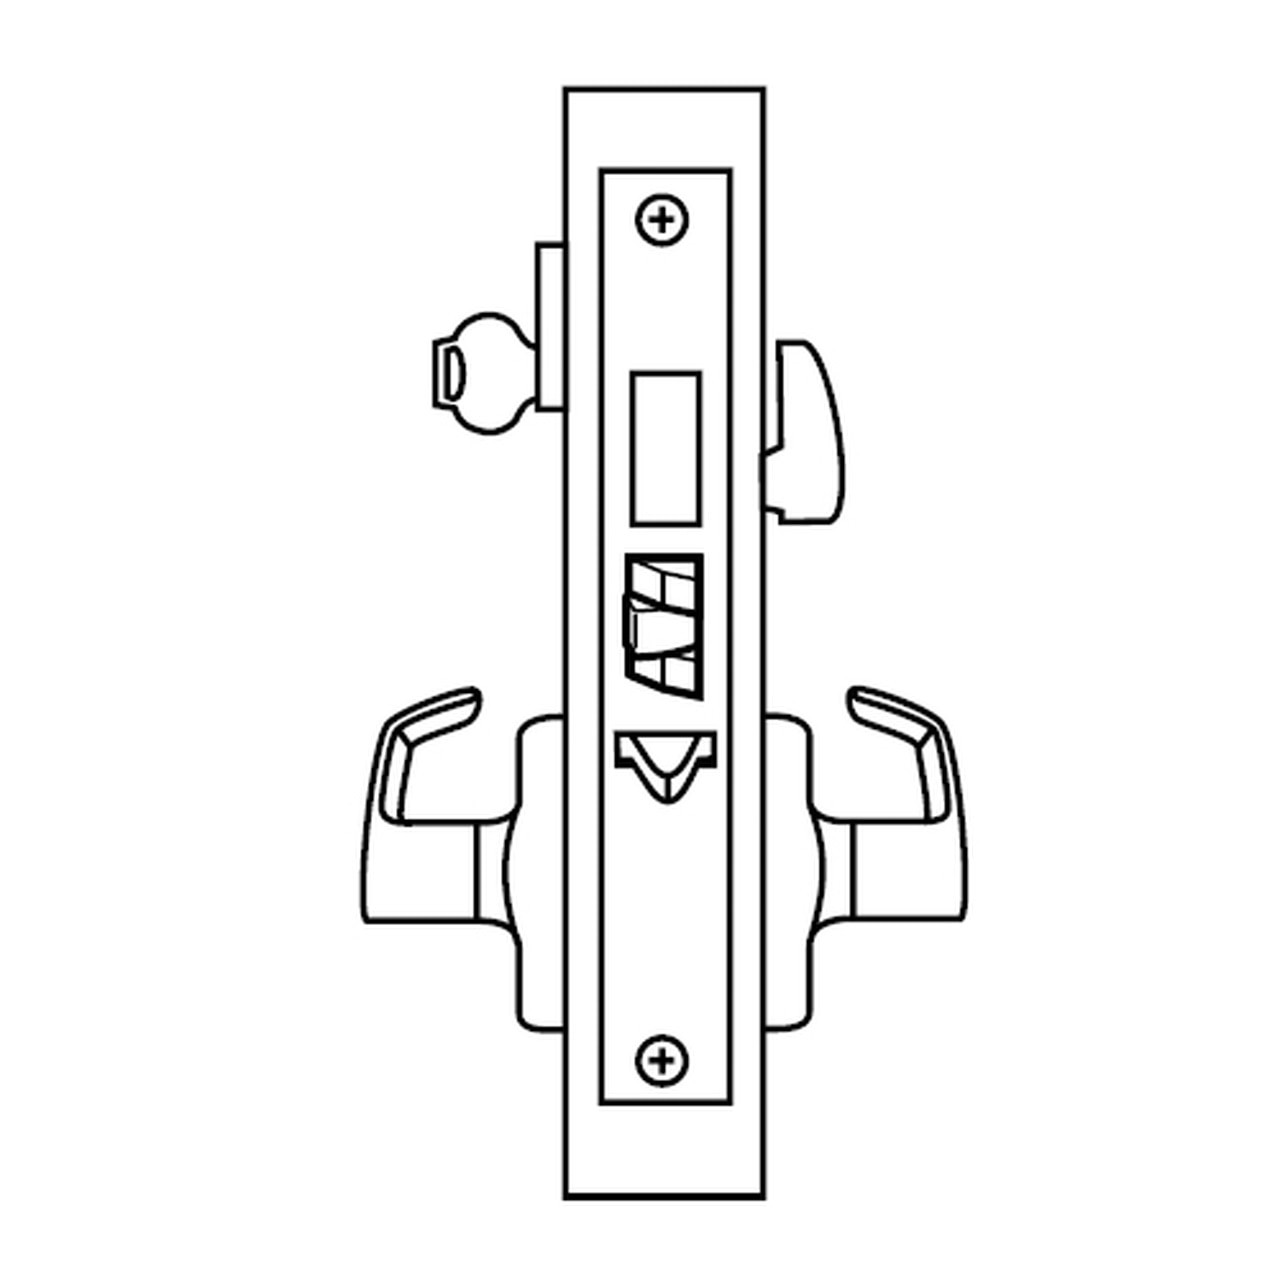 ML2075-ASB-625 Corbin Russwin ML2000 Series Mortise Entrance or Office Security Locksets with Armstrong Lever and Deadbolt in Bright Chrome